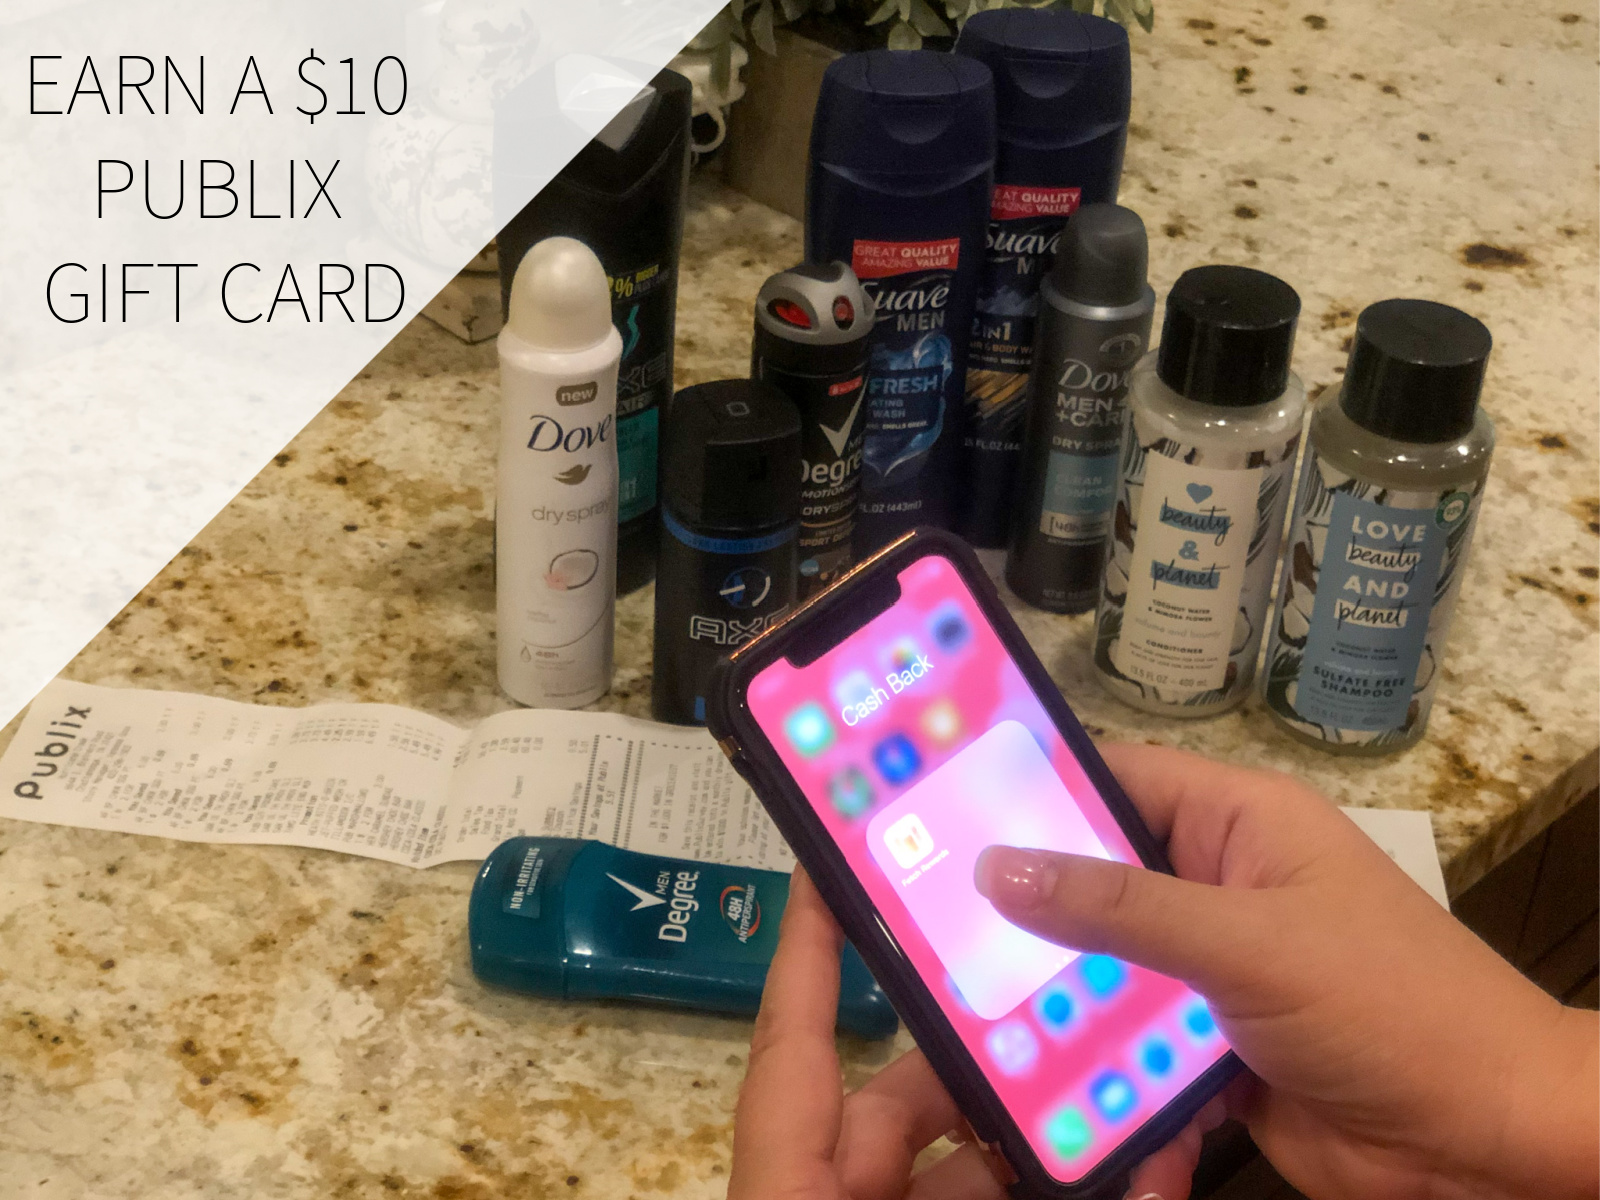 Purchase Your Favorite Unilever Personal Care Products At Publix And Earn Up To $50 In Gift Cards on I Heart Publix